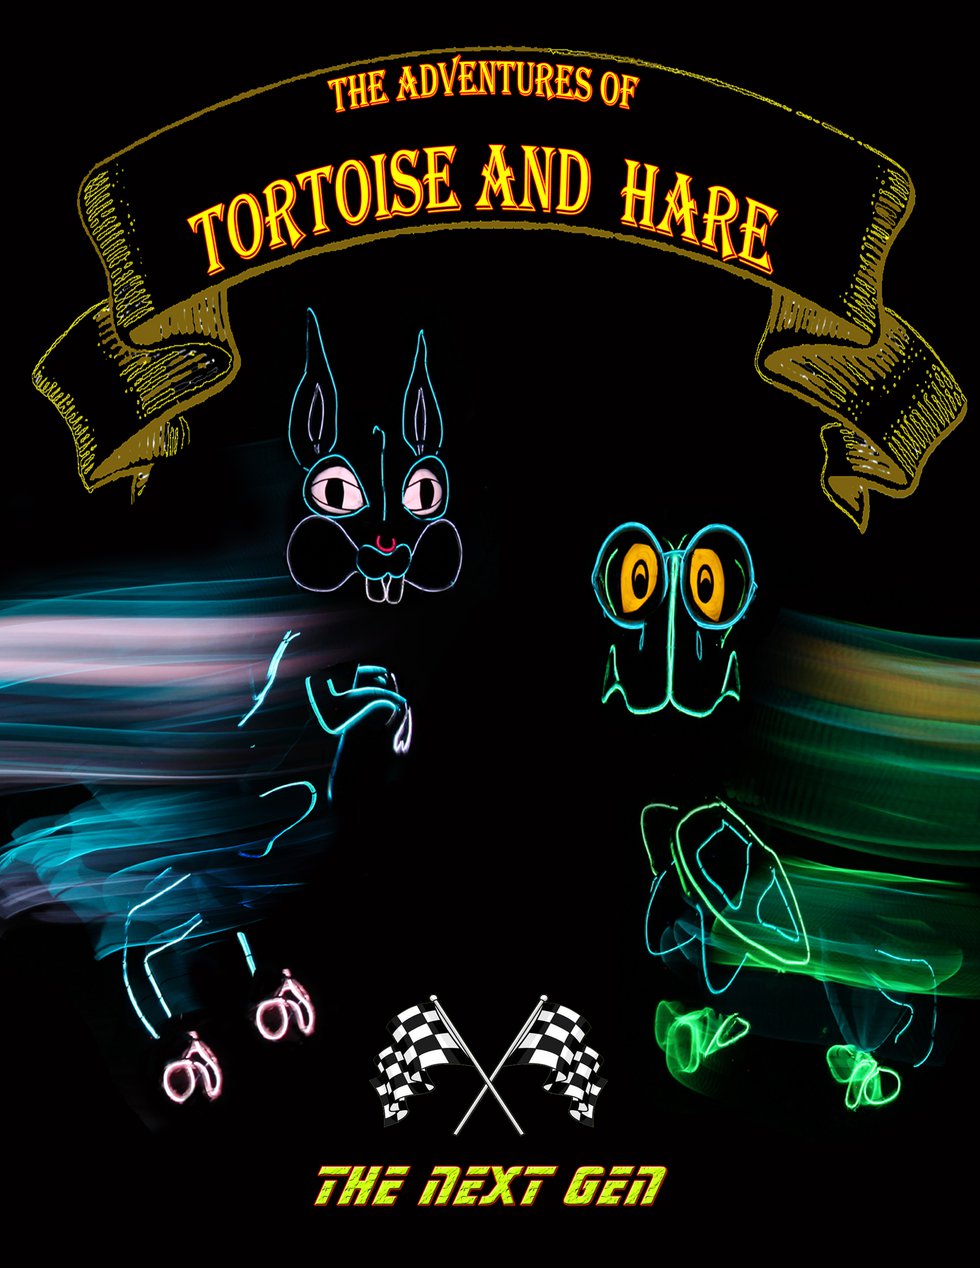 TORTOISE AND THE HARE NEXT GEN POSTER VERSION 3 LIGHTWIRE THEATE (deleted b34376a9708b448114dc345b6141c026).jpg